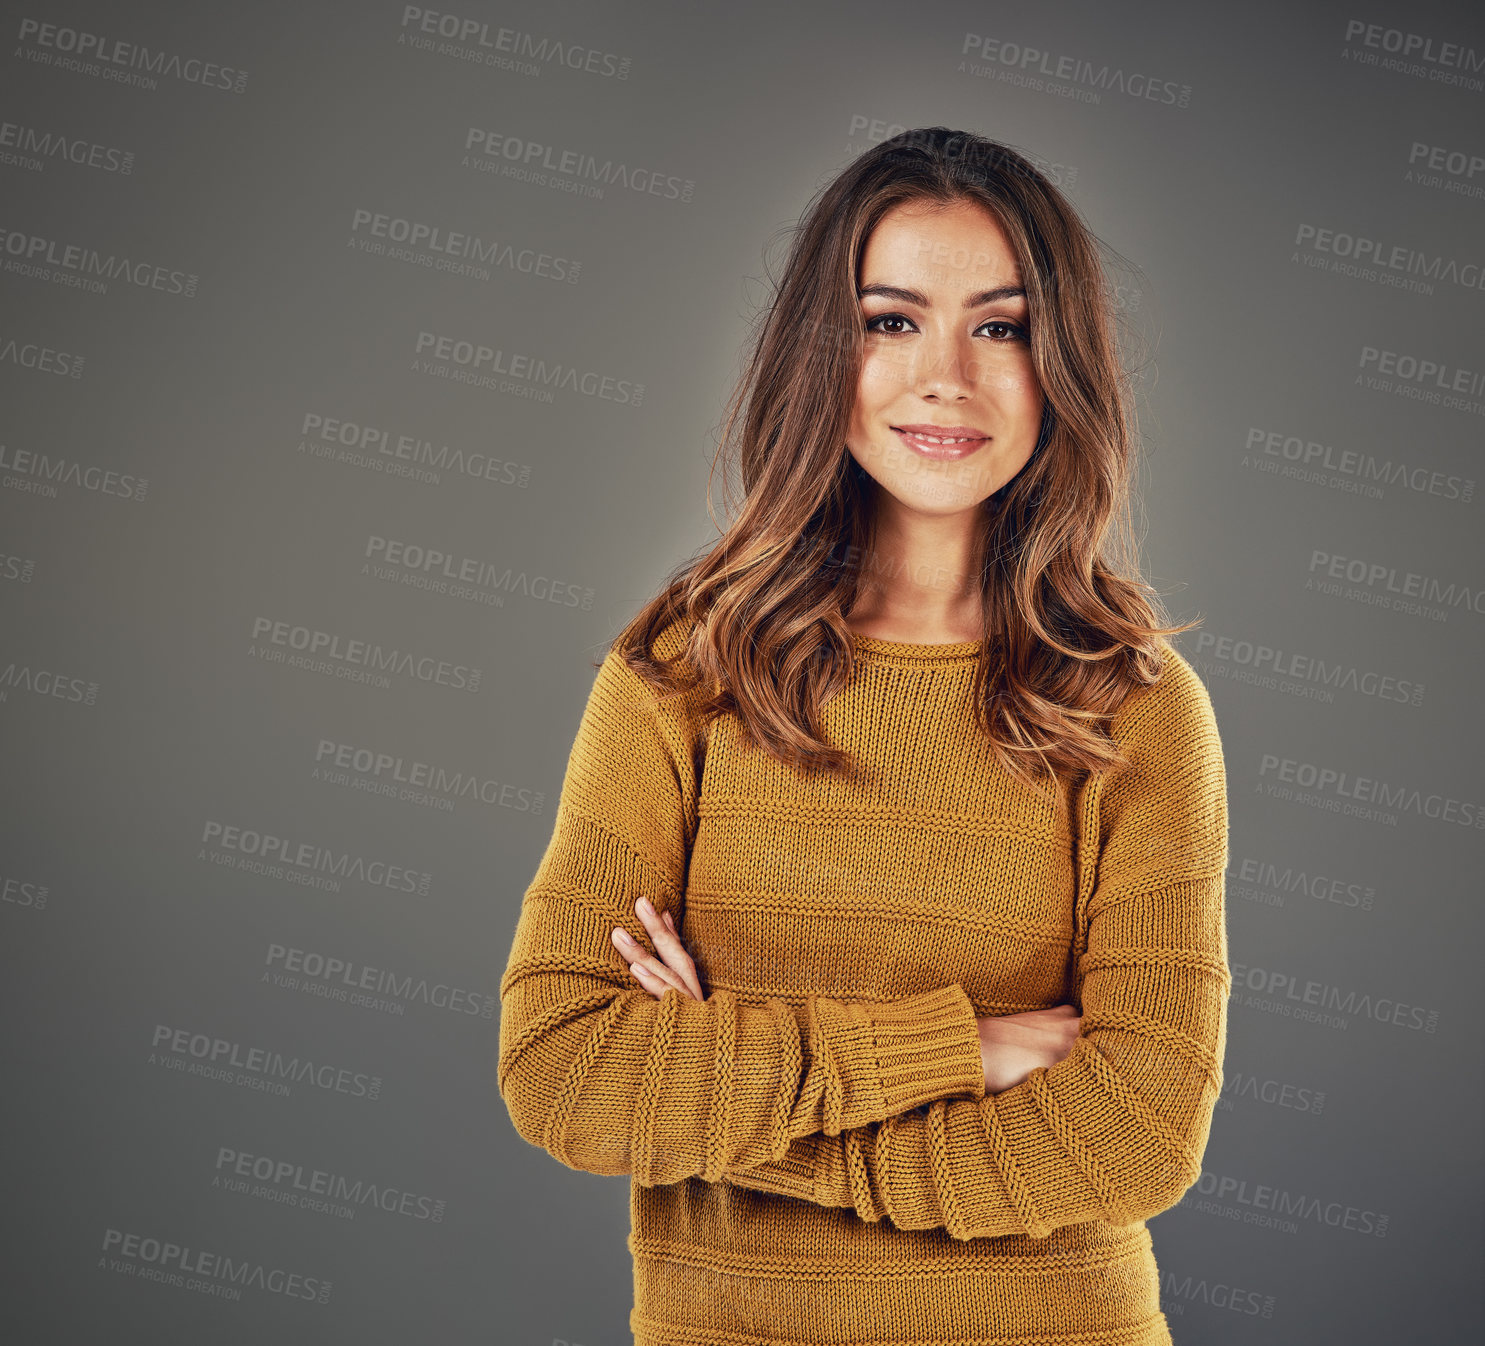 Buy stock photo Portrait of an attractive young woman standing with her arms folded against a grey background